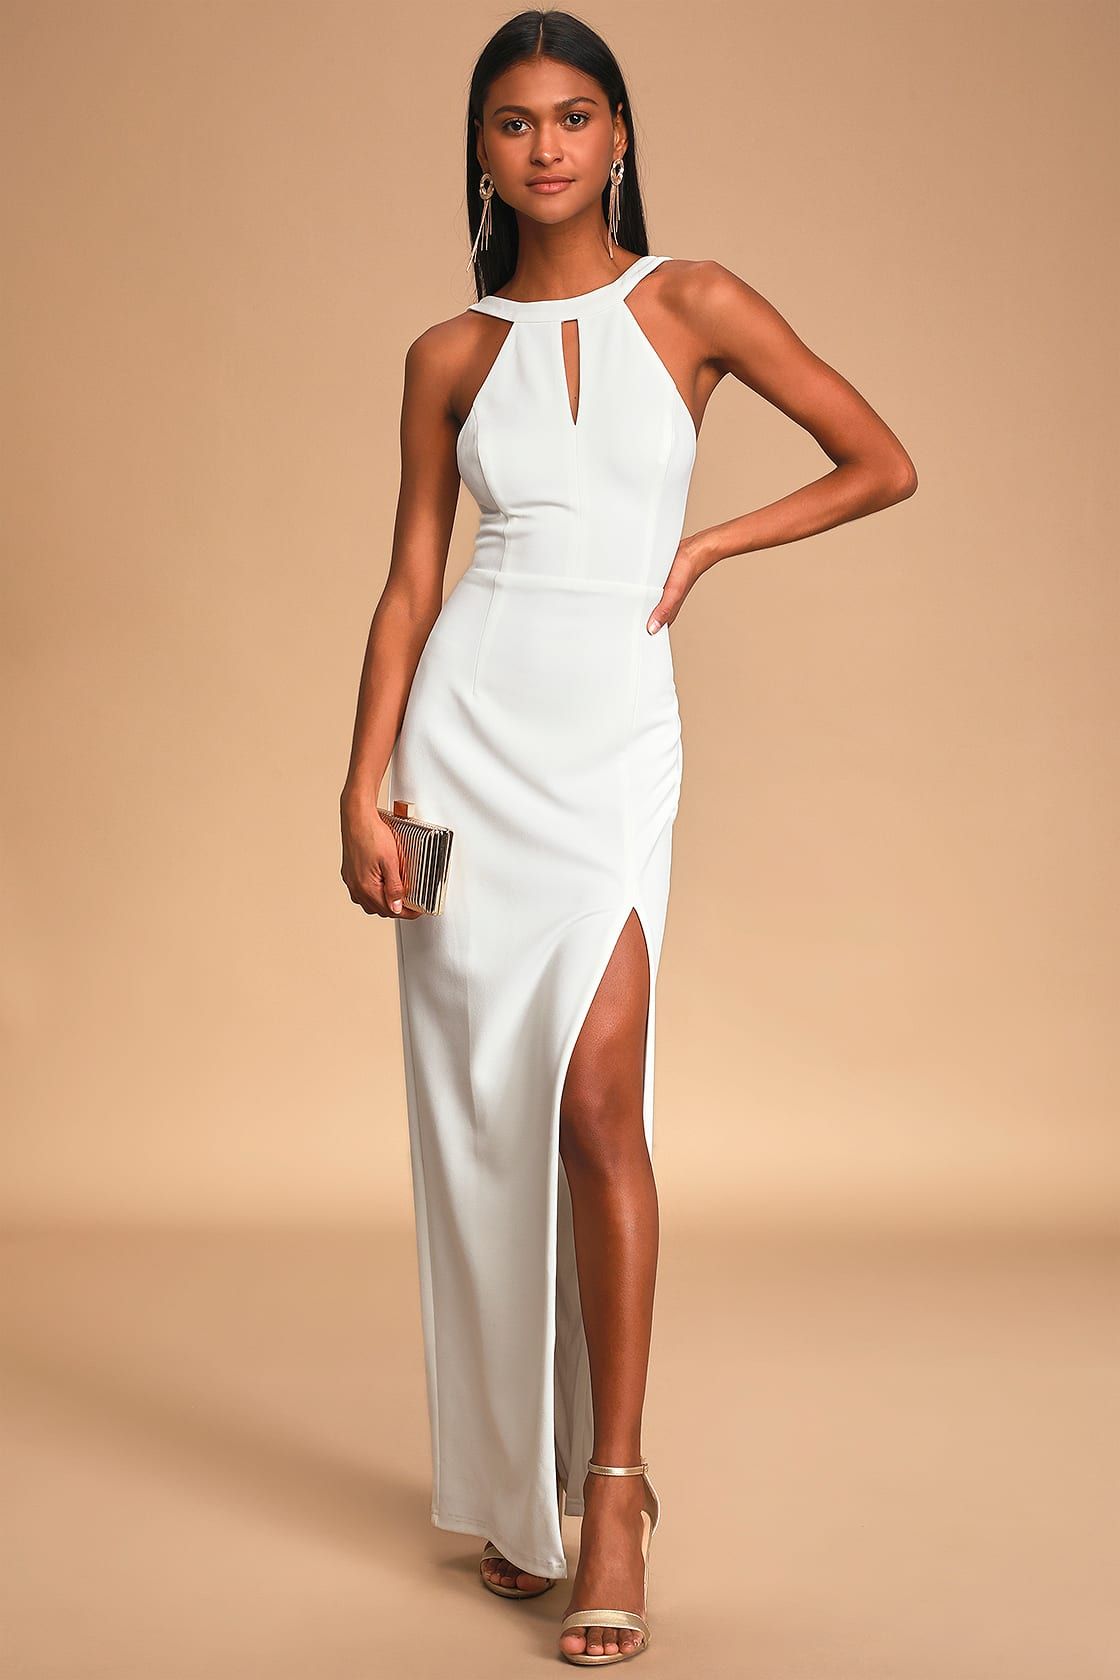 All You Need is Love White Halter Backless Maxi Dress | Lulus